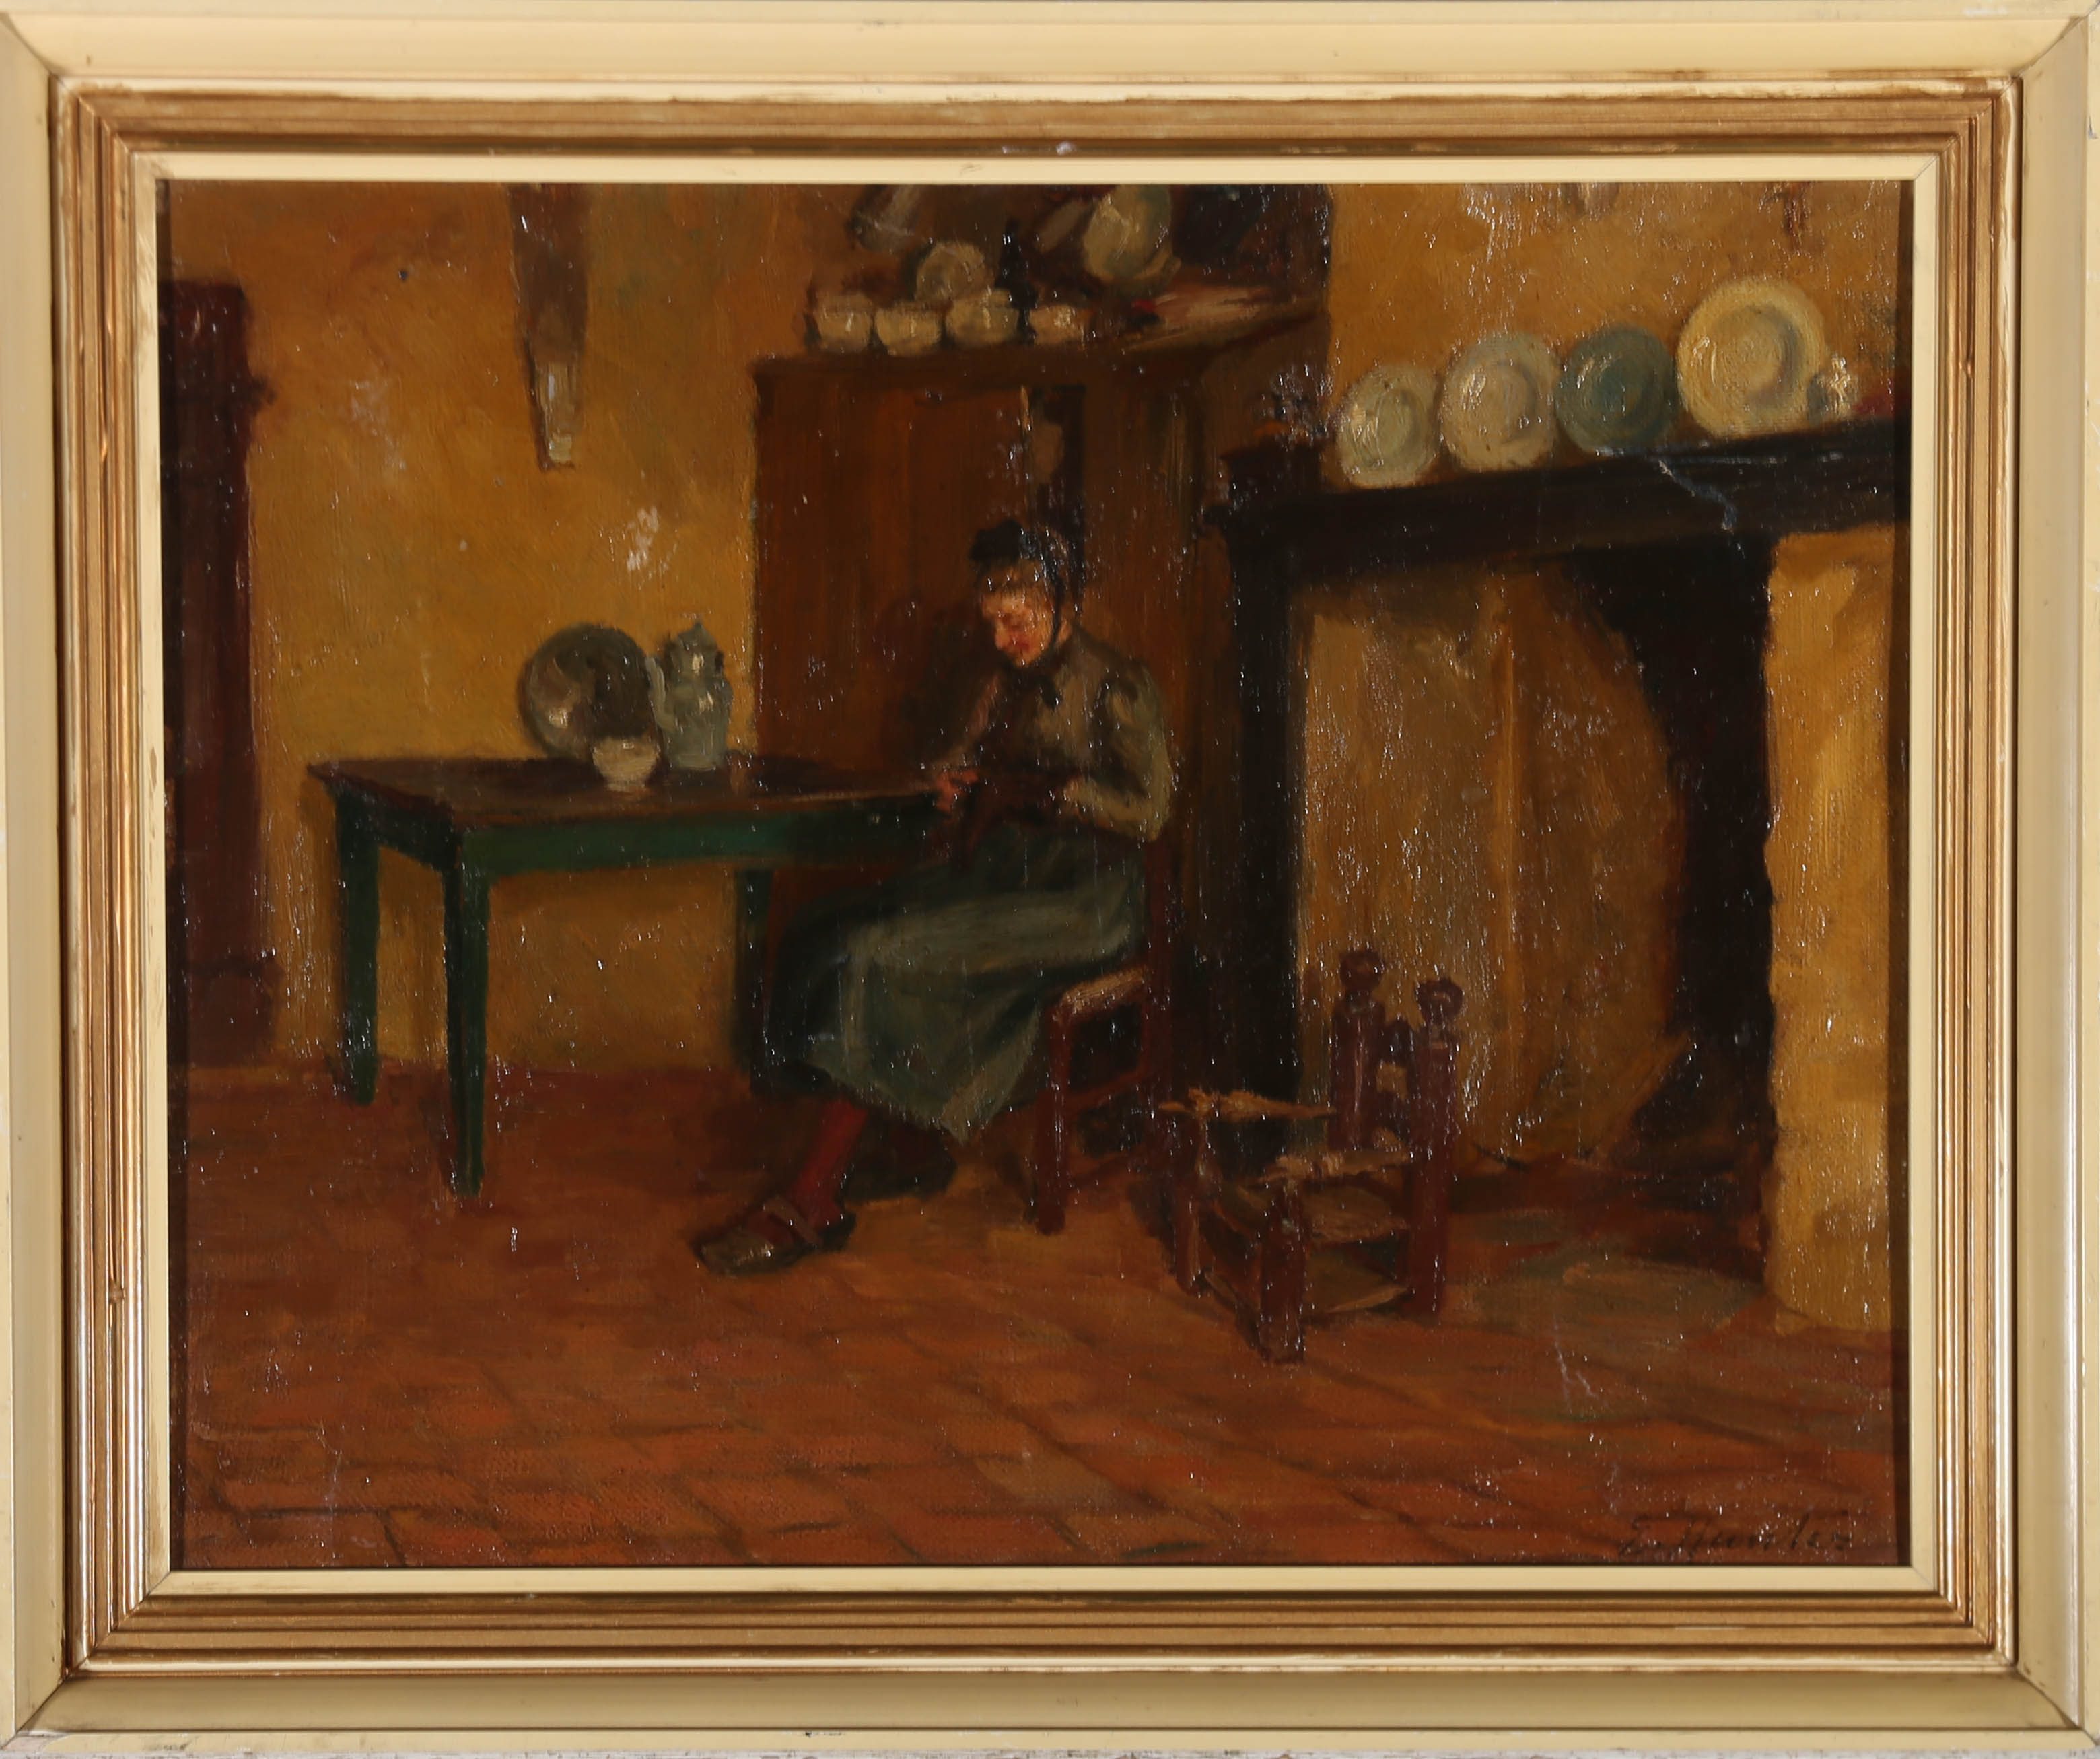 A charming early 20th Century interior scene in impressionistic oil. The scene shows a woman in Edwardian dress, sitting in a rustic cottage kitchen by the fireplace, darning an item of clothing. A small wooden children's chair sits next to her,